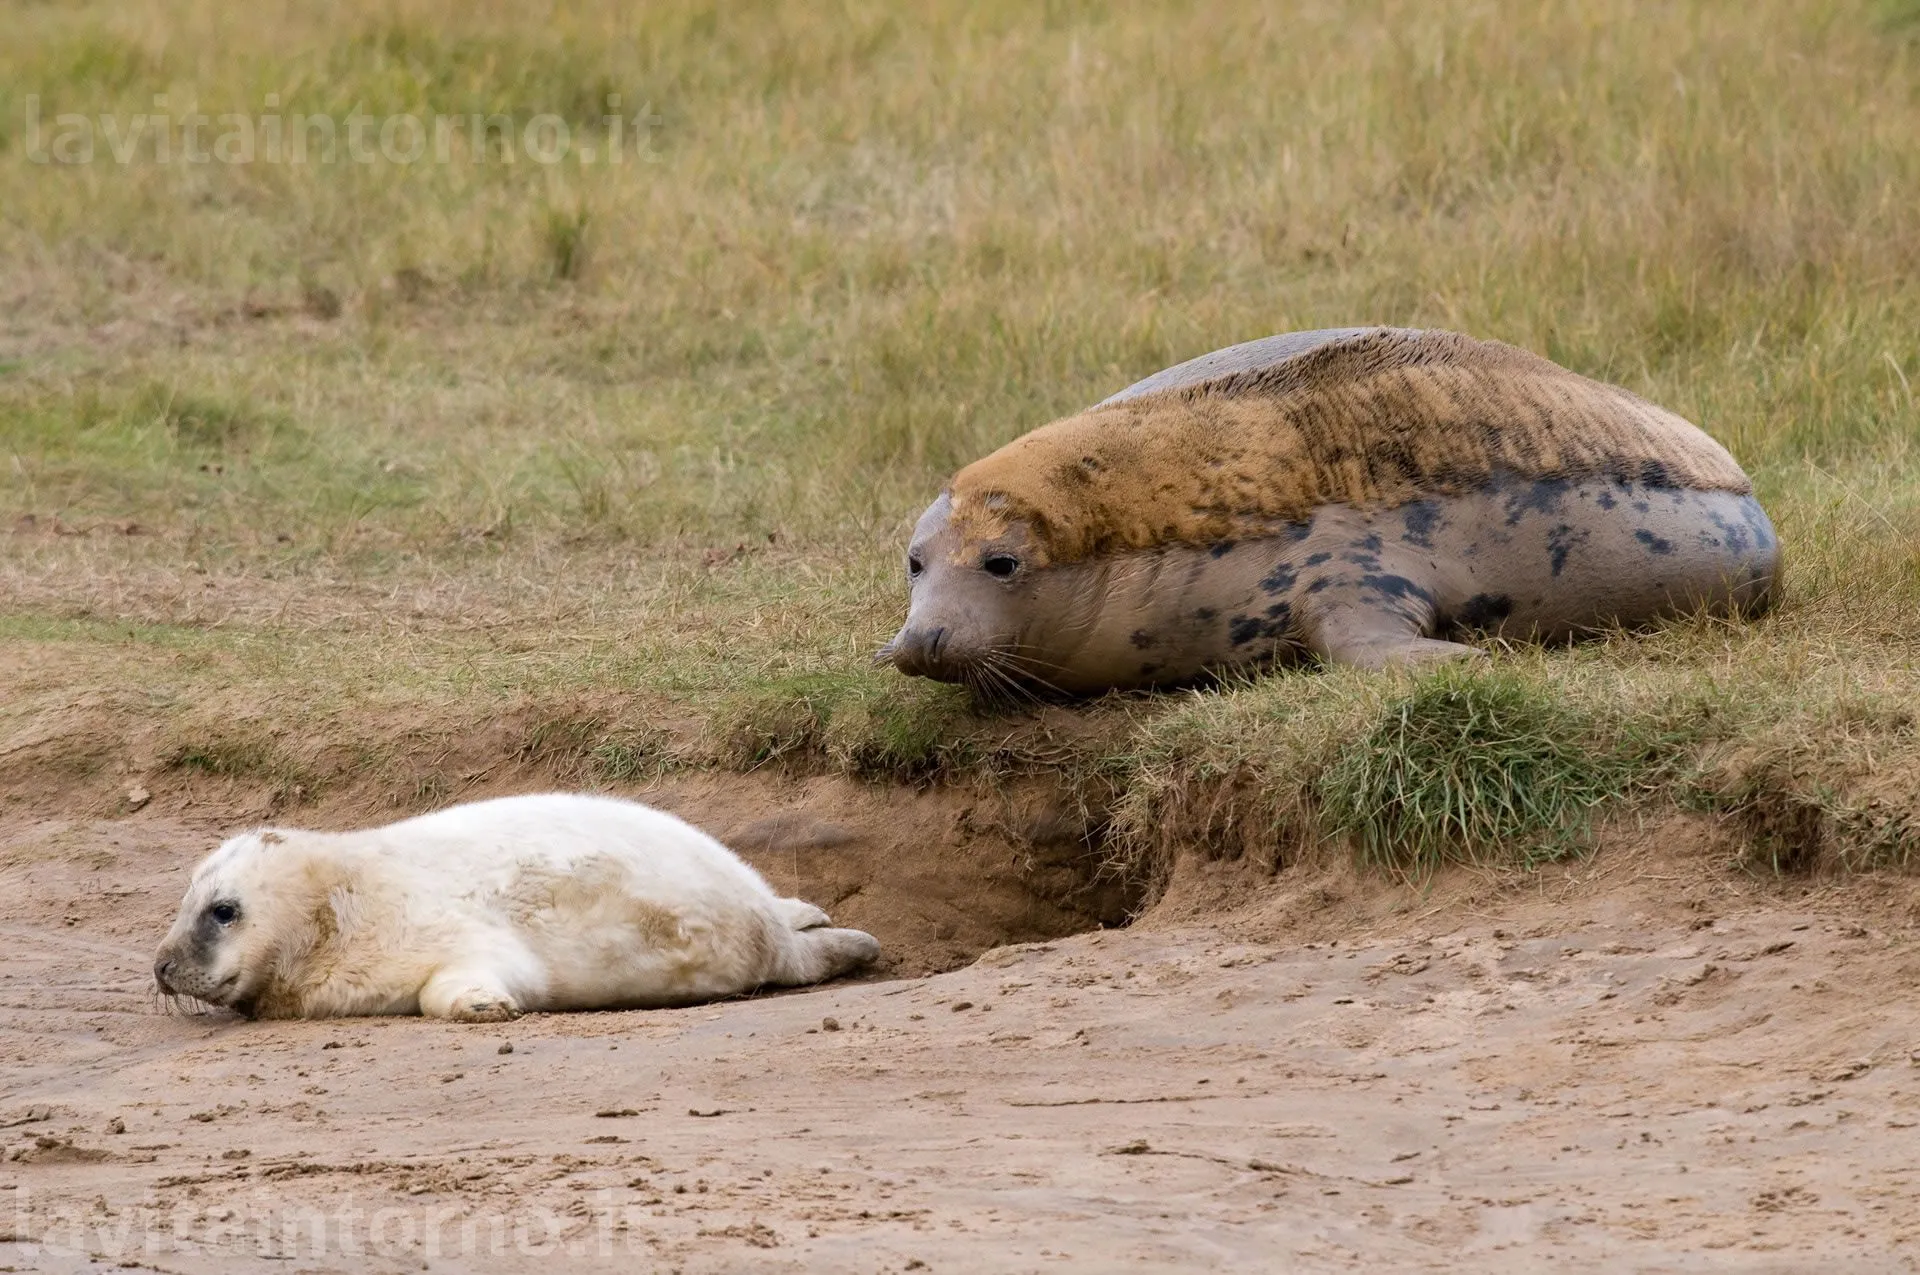 Gray seal: mother and pup
D700
Nikkor 300 F/4 IF ED AF-S 